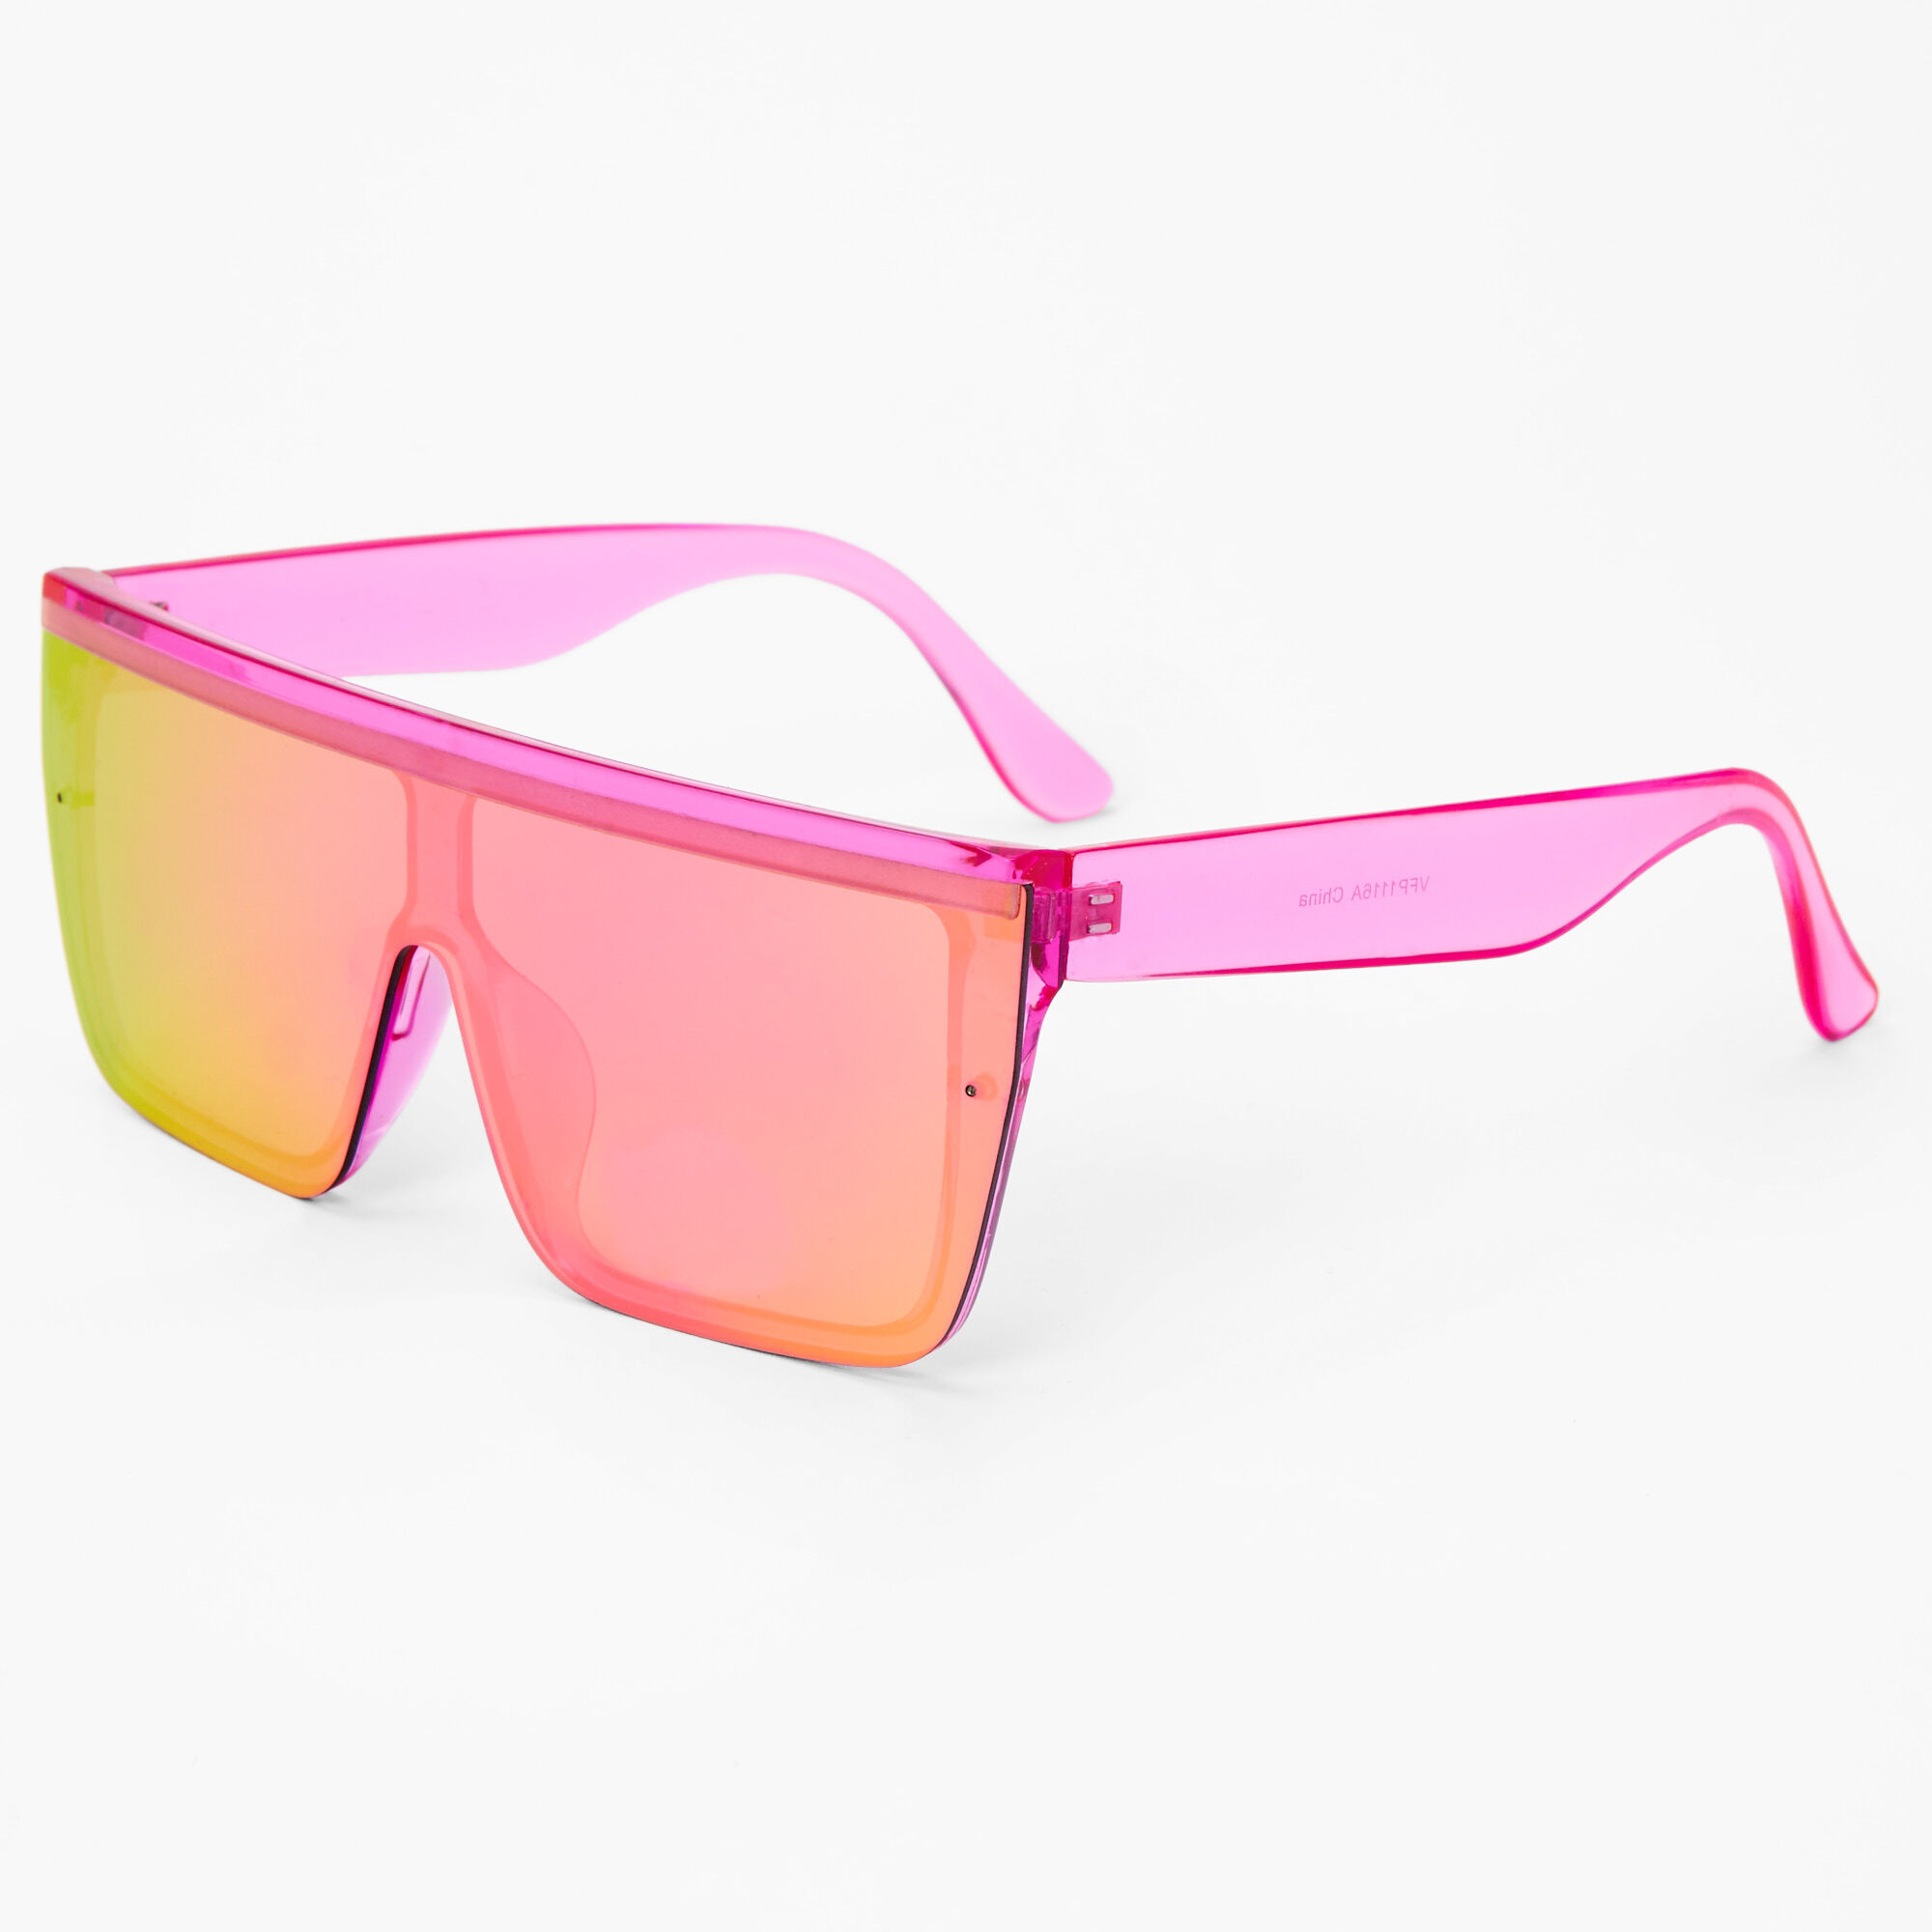 View Claires Neon Shield Sunglasses Pink information